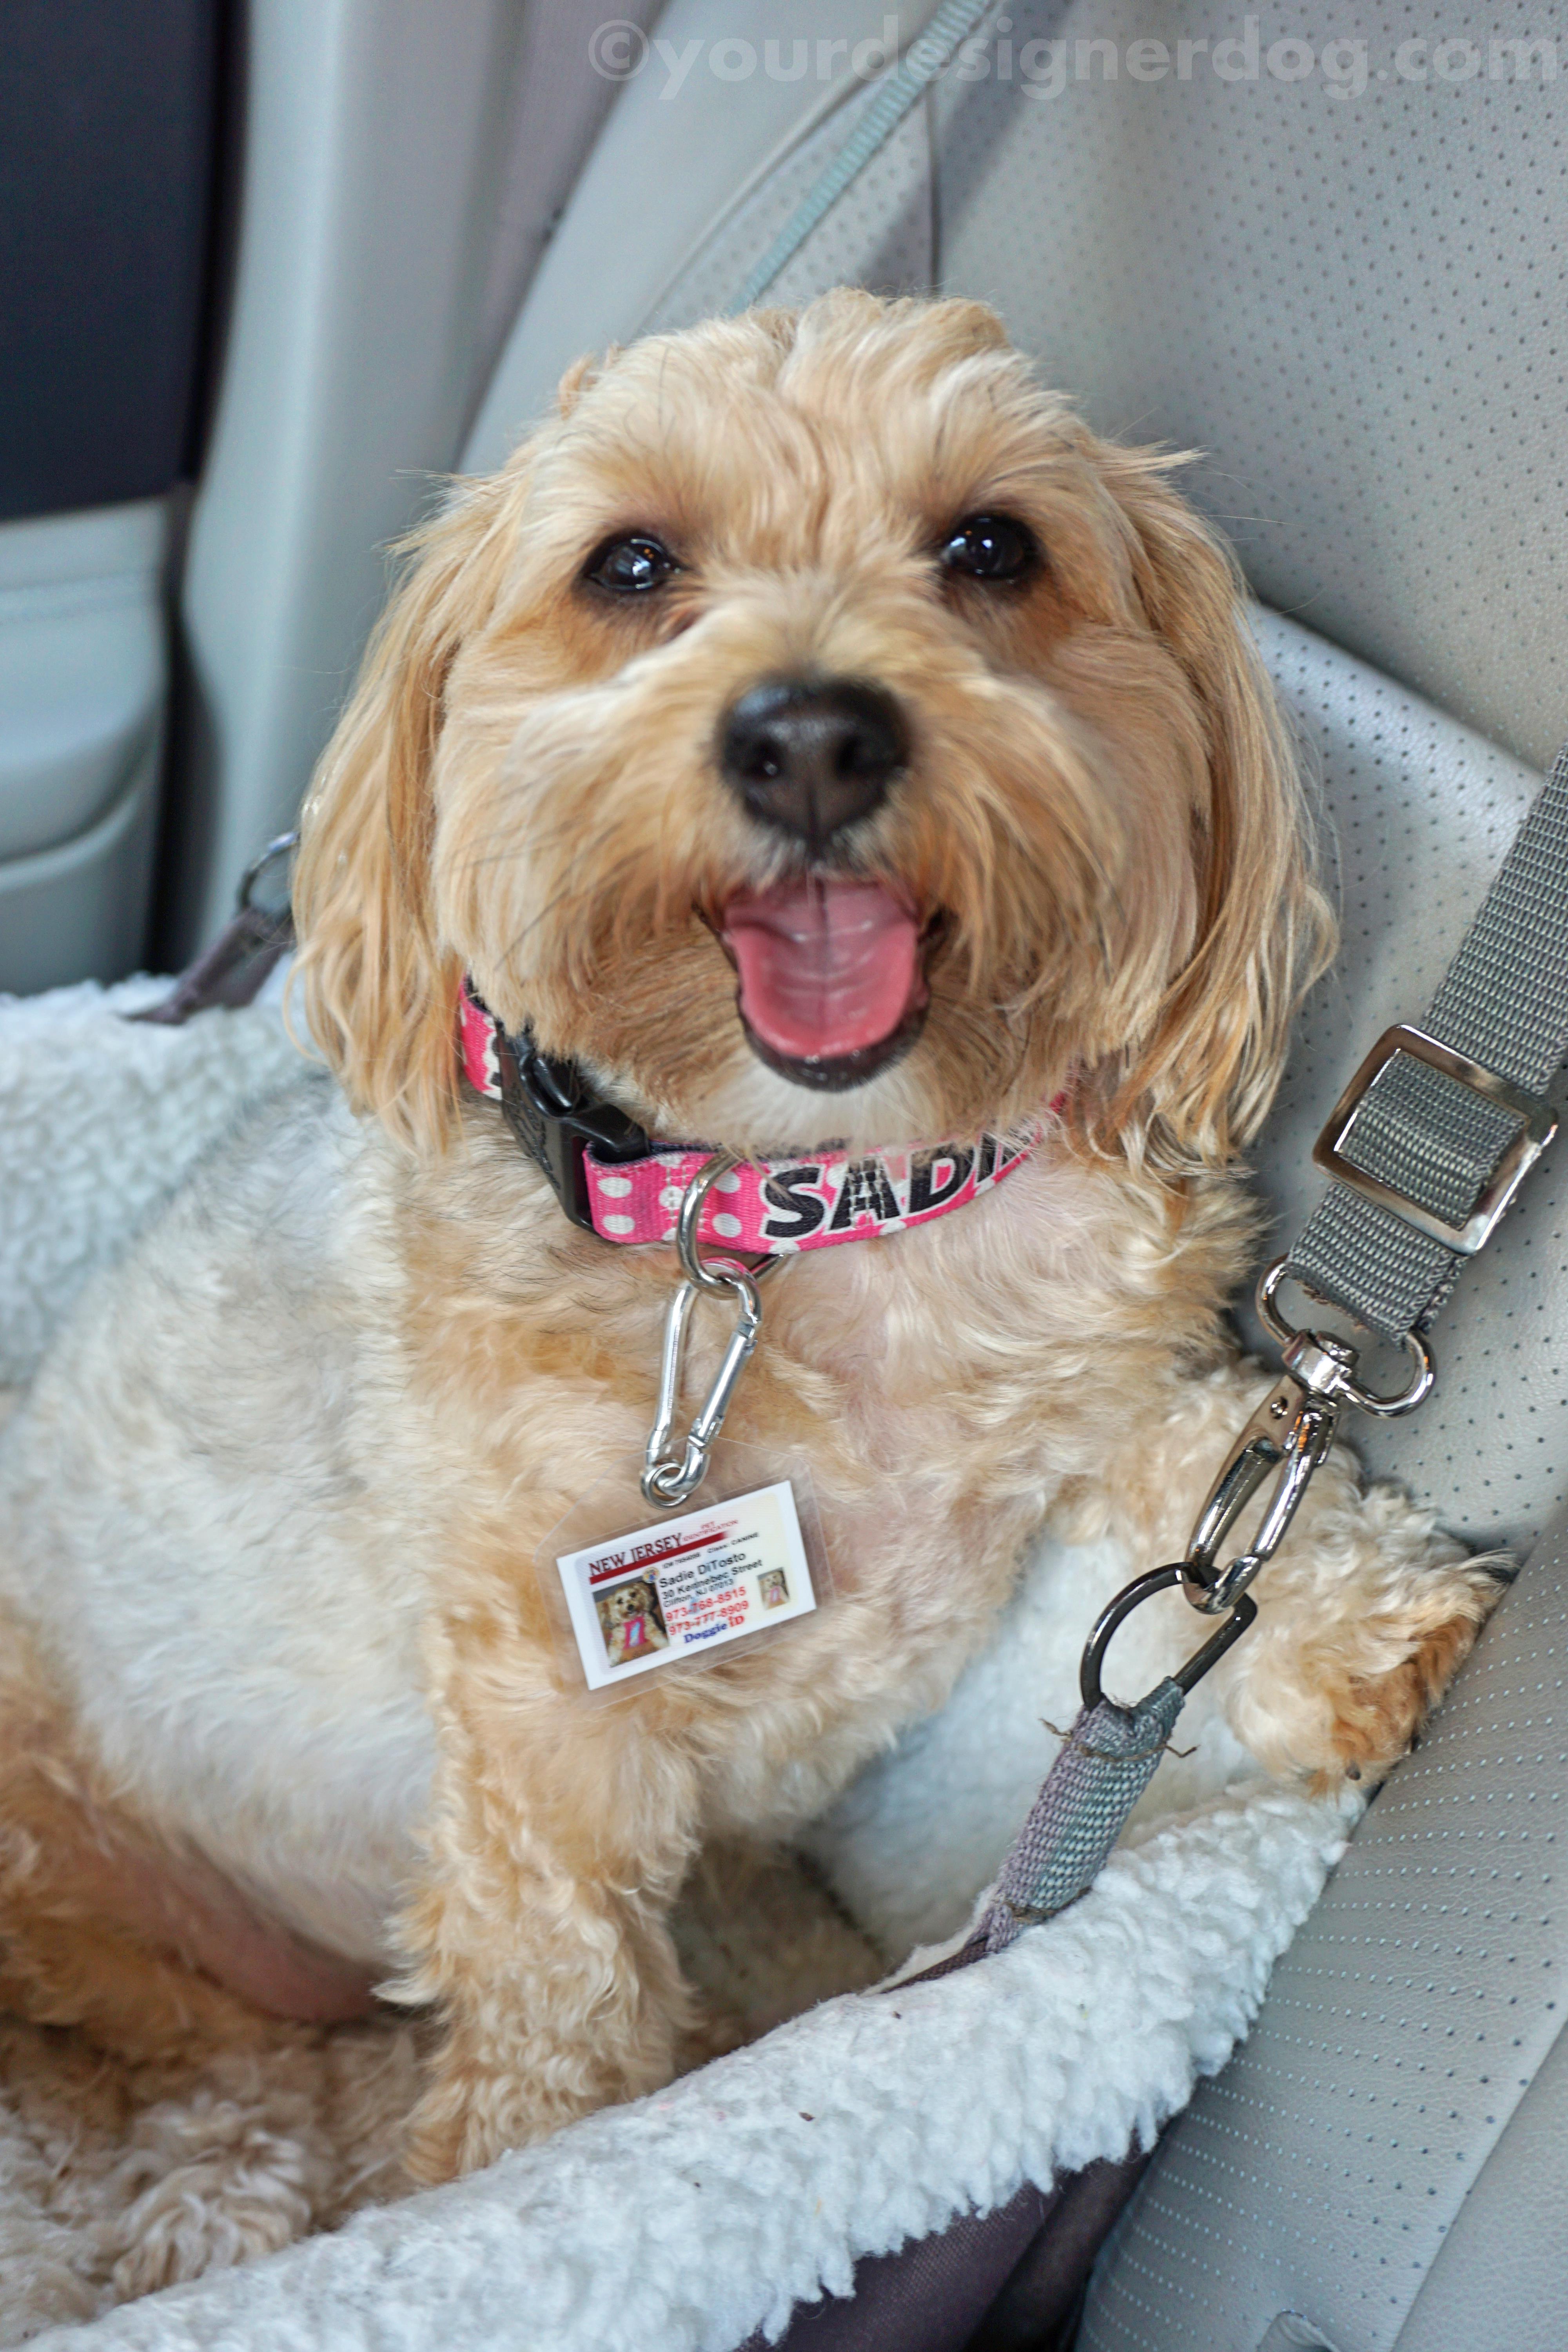 dogs, designer dogs, yorkipoo, yorkie poo, tongue out, dog smiling, id tag, driver's license